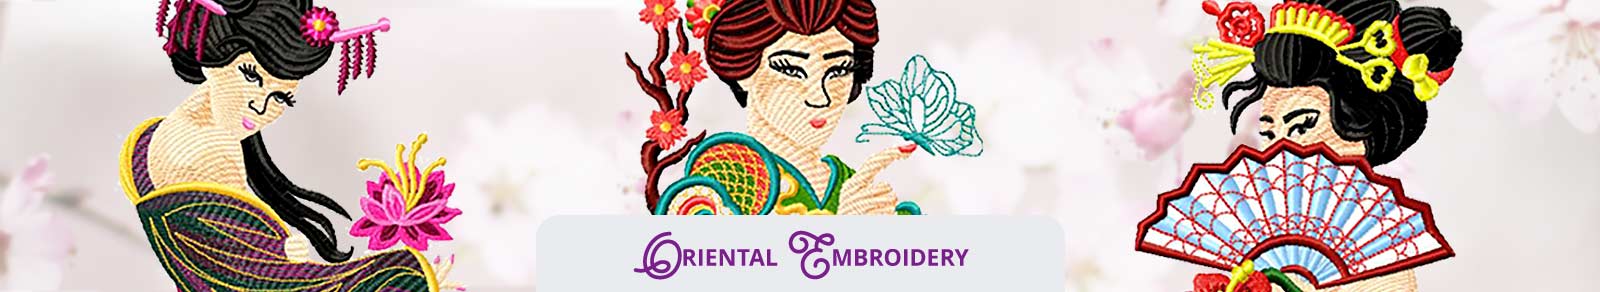 Oriental Embroidery